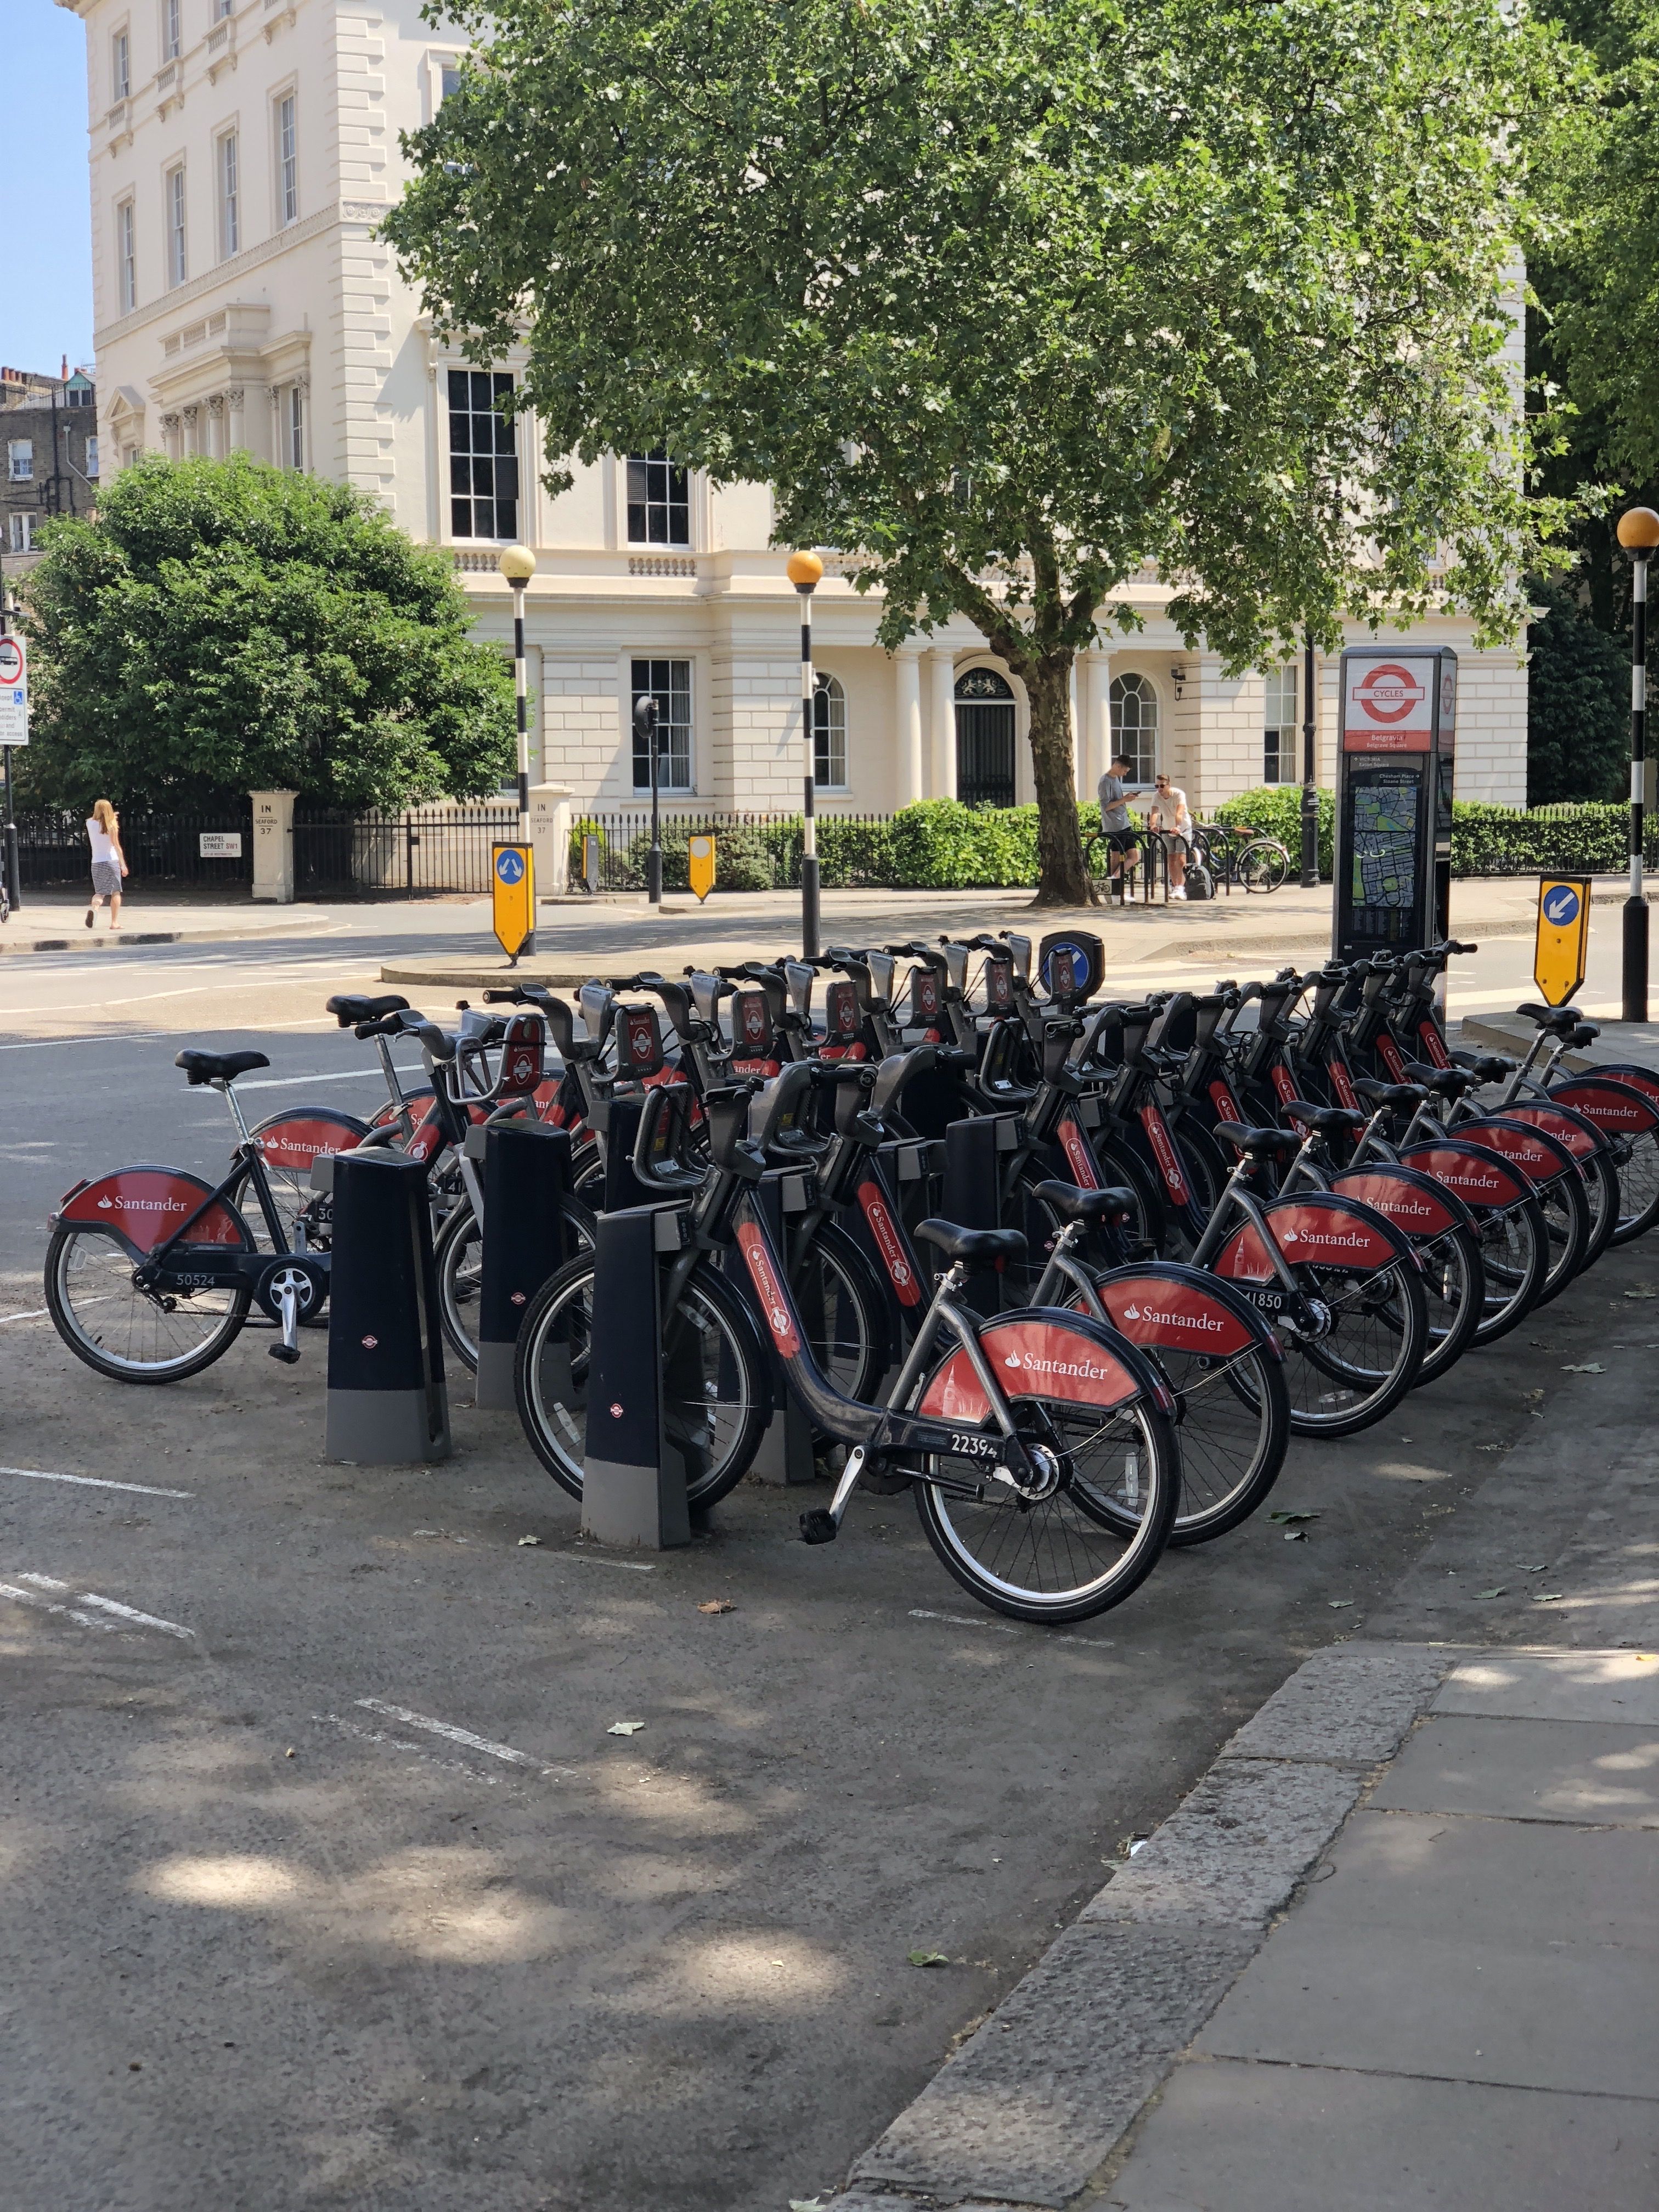 The mayor's transportation strategy aims to provide alternative, environmentally friendly modes of transport in order to lessen reliance on motor vehicles. Referring to the increased use of Santander Bikes, Mayor Sadiq Khan said "That's good for our health, our air quality and for tackling congestion." Image by Rohan Naik. United Kingdom, 2018.